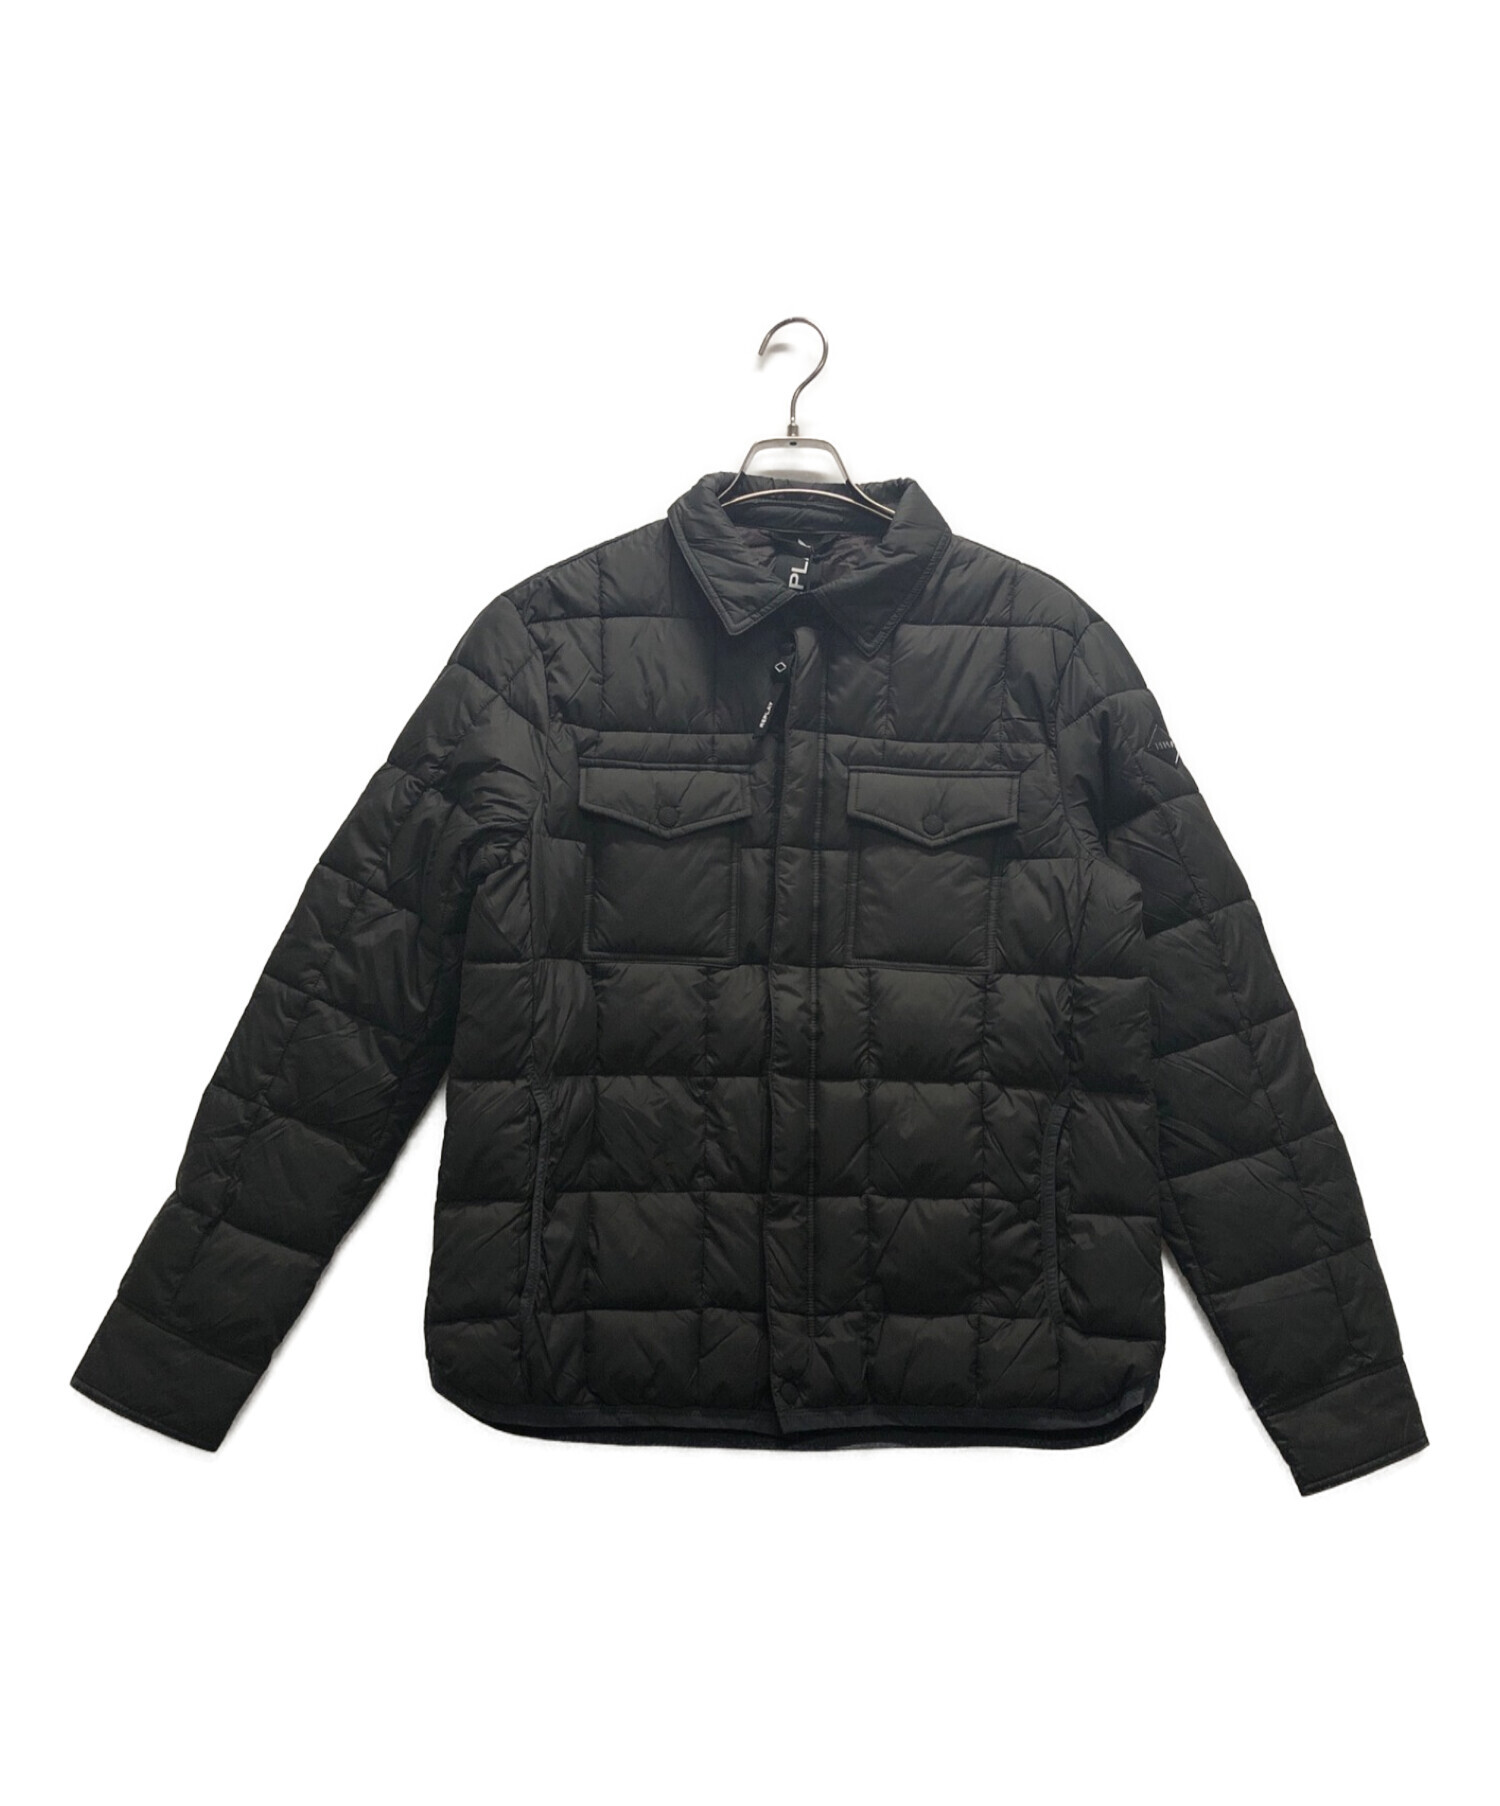 REPLAY (リプレイ) RECYCLED QUILTED JACKET WITH COLLAR グリーン サイズ:L 未使用品